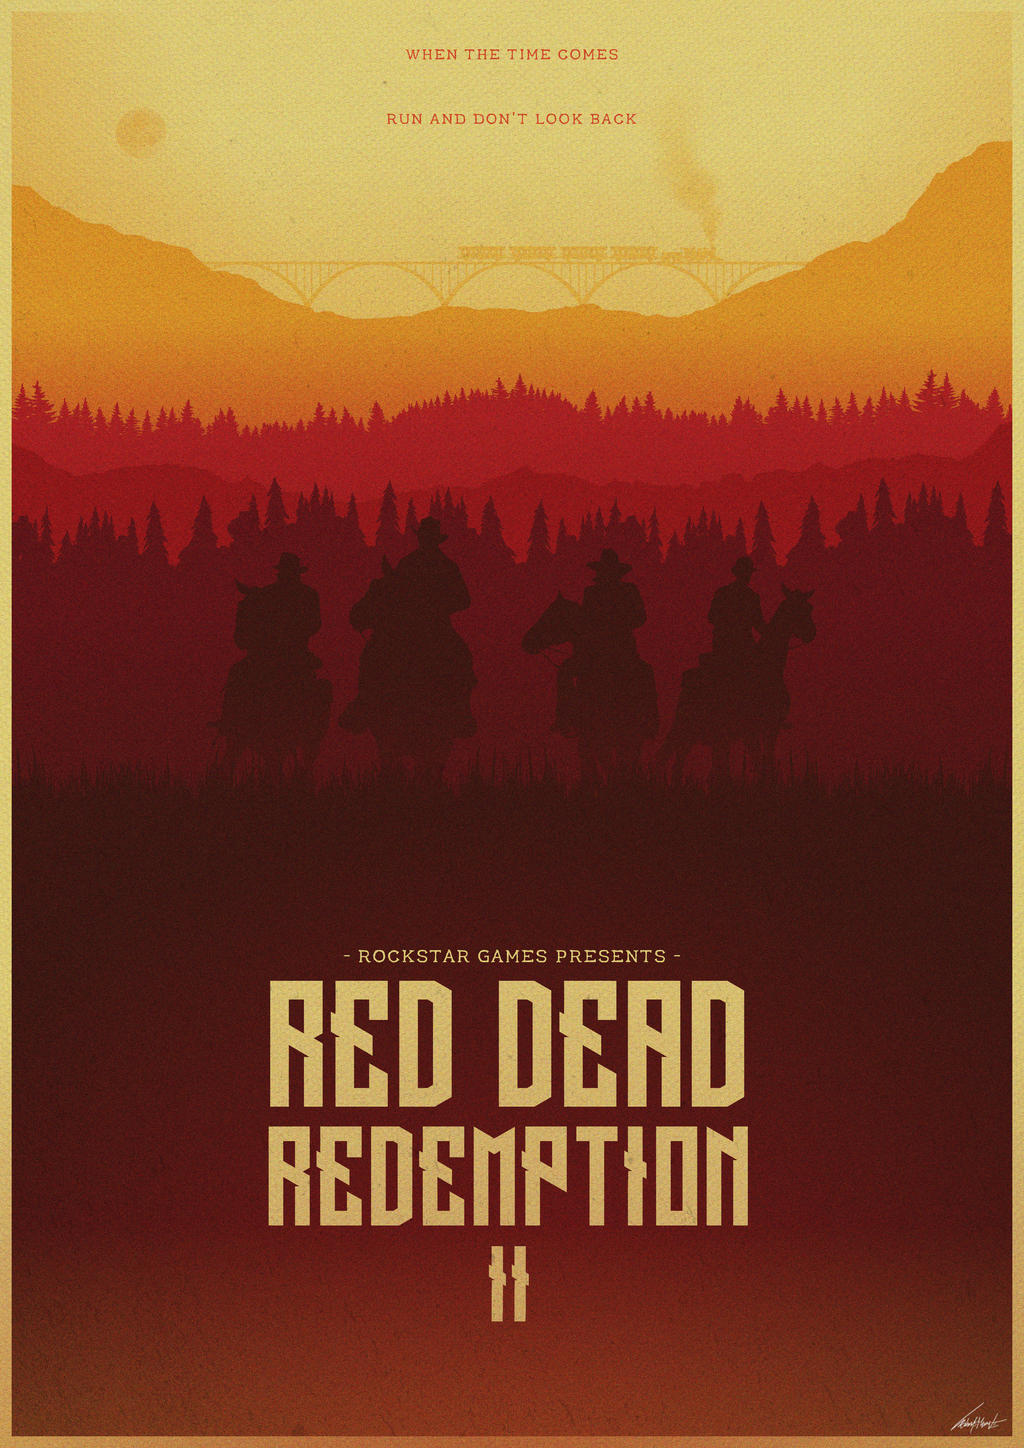 No Looking Back Red Dead Redemption 2 Poster by on DeviantArt